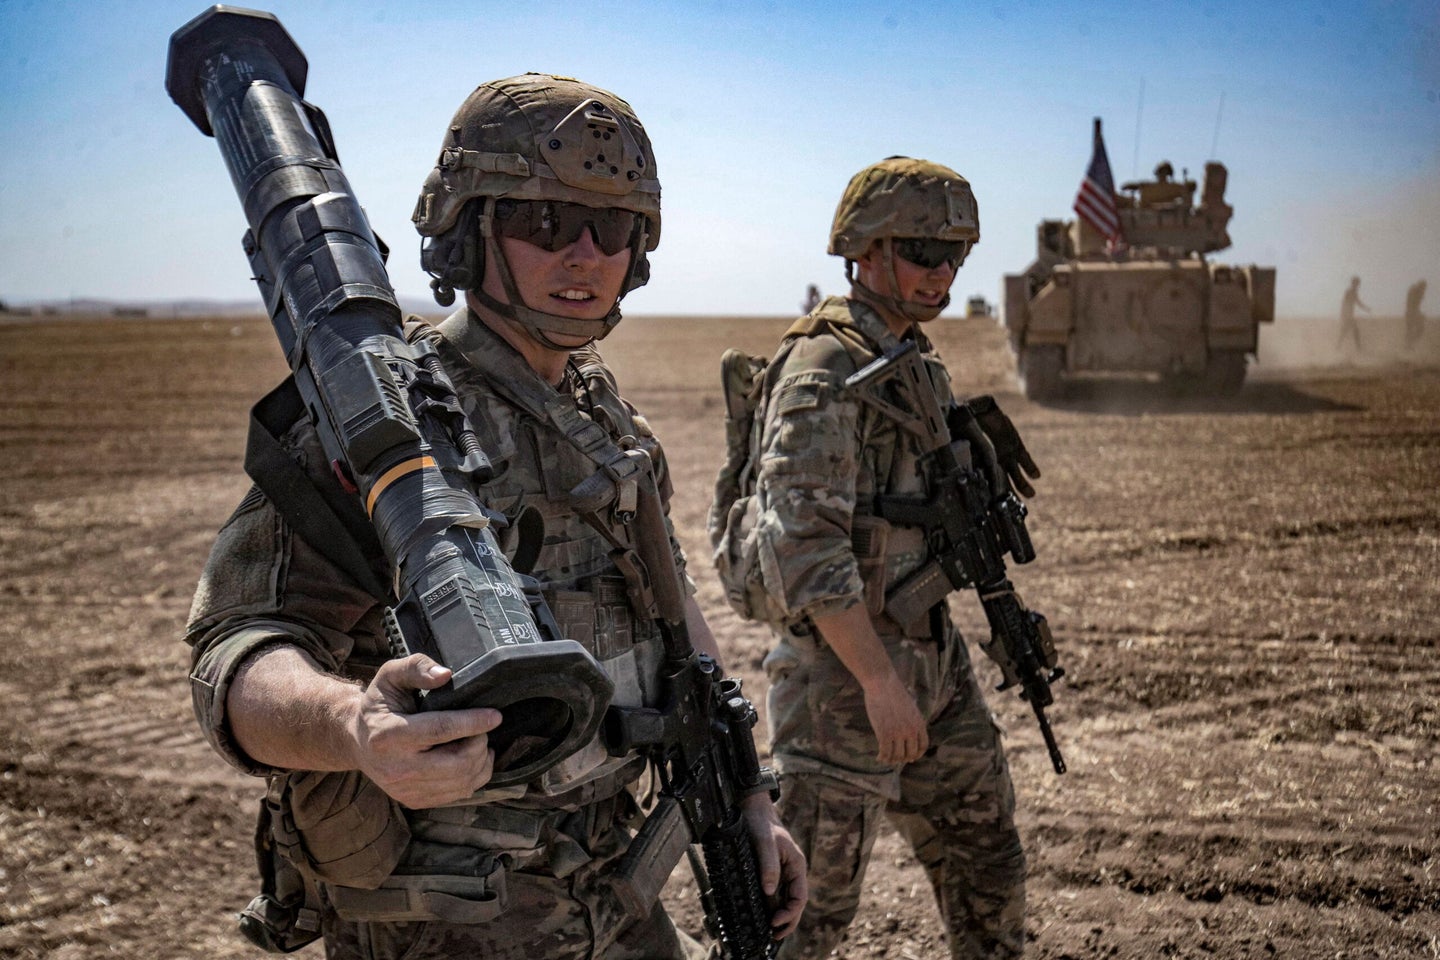 A US soldier walks with an AT4 anti-tank weapon during a joint military exercise between forces of the US-led "Combined Joint Task Force-Operation Inherent Resolve" coalition against the Islamic State (IS) group and members of the Syrian Democratic Forces (SDF) in the countryside of the town of al-Malikiya (Derik in Kurdish) in Syria's northeastern Hasakah province on September 7, 2022. (Photo by Delil SOULEIMAN / AFP) (Photo by DELIL SOULEIMAN/AFP via Getty Images)